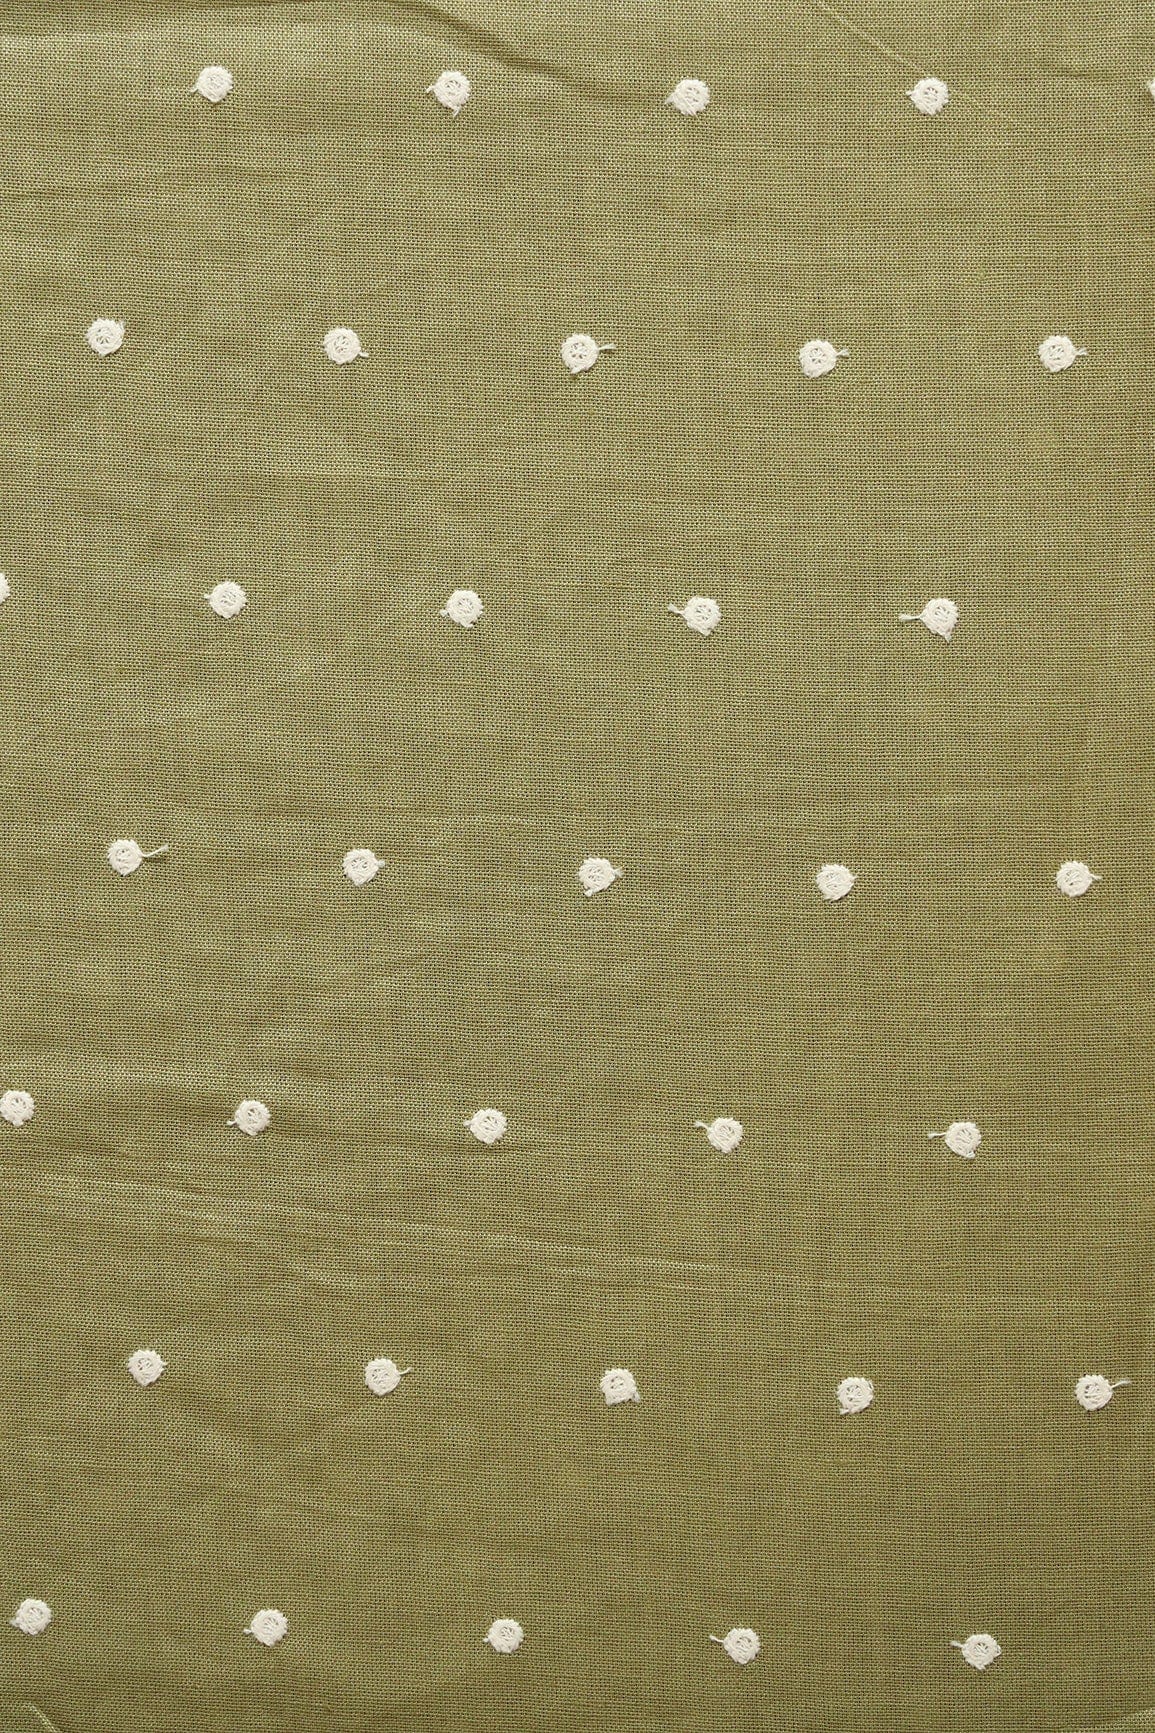 doeraa Embroidery Fabrics White Thread Small Polka Embroidery Work On Olive Cotton Linen Fabric